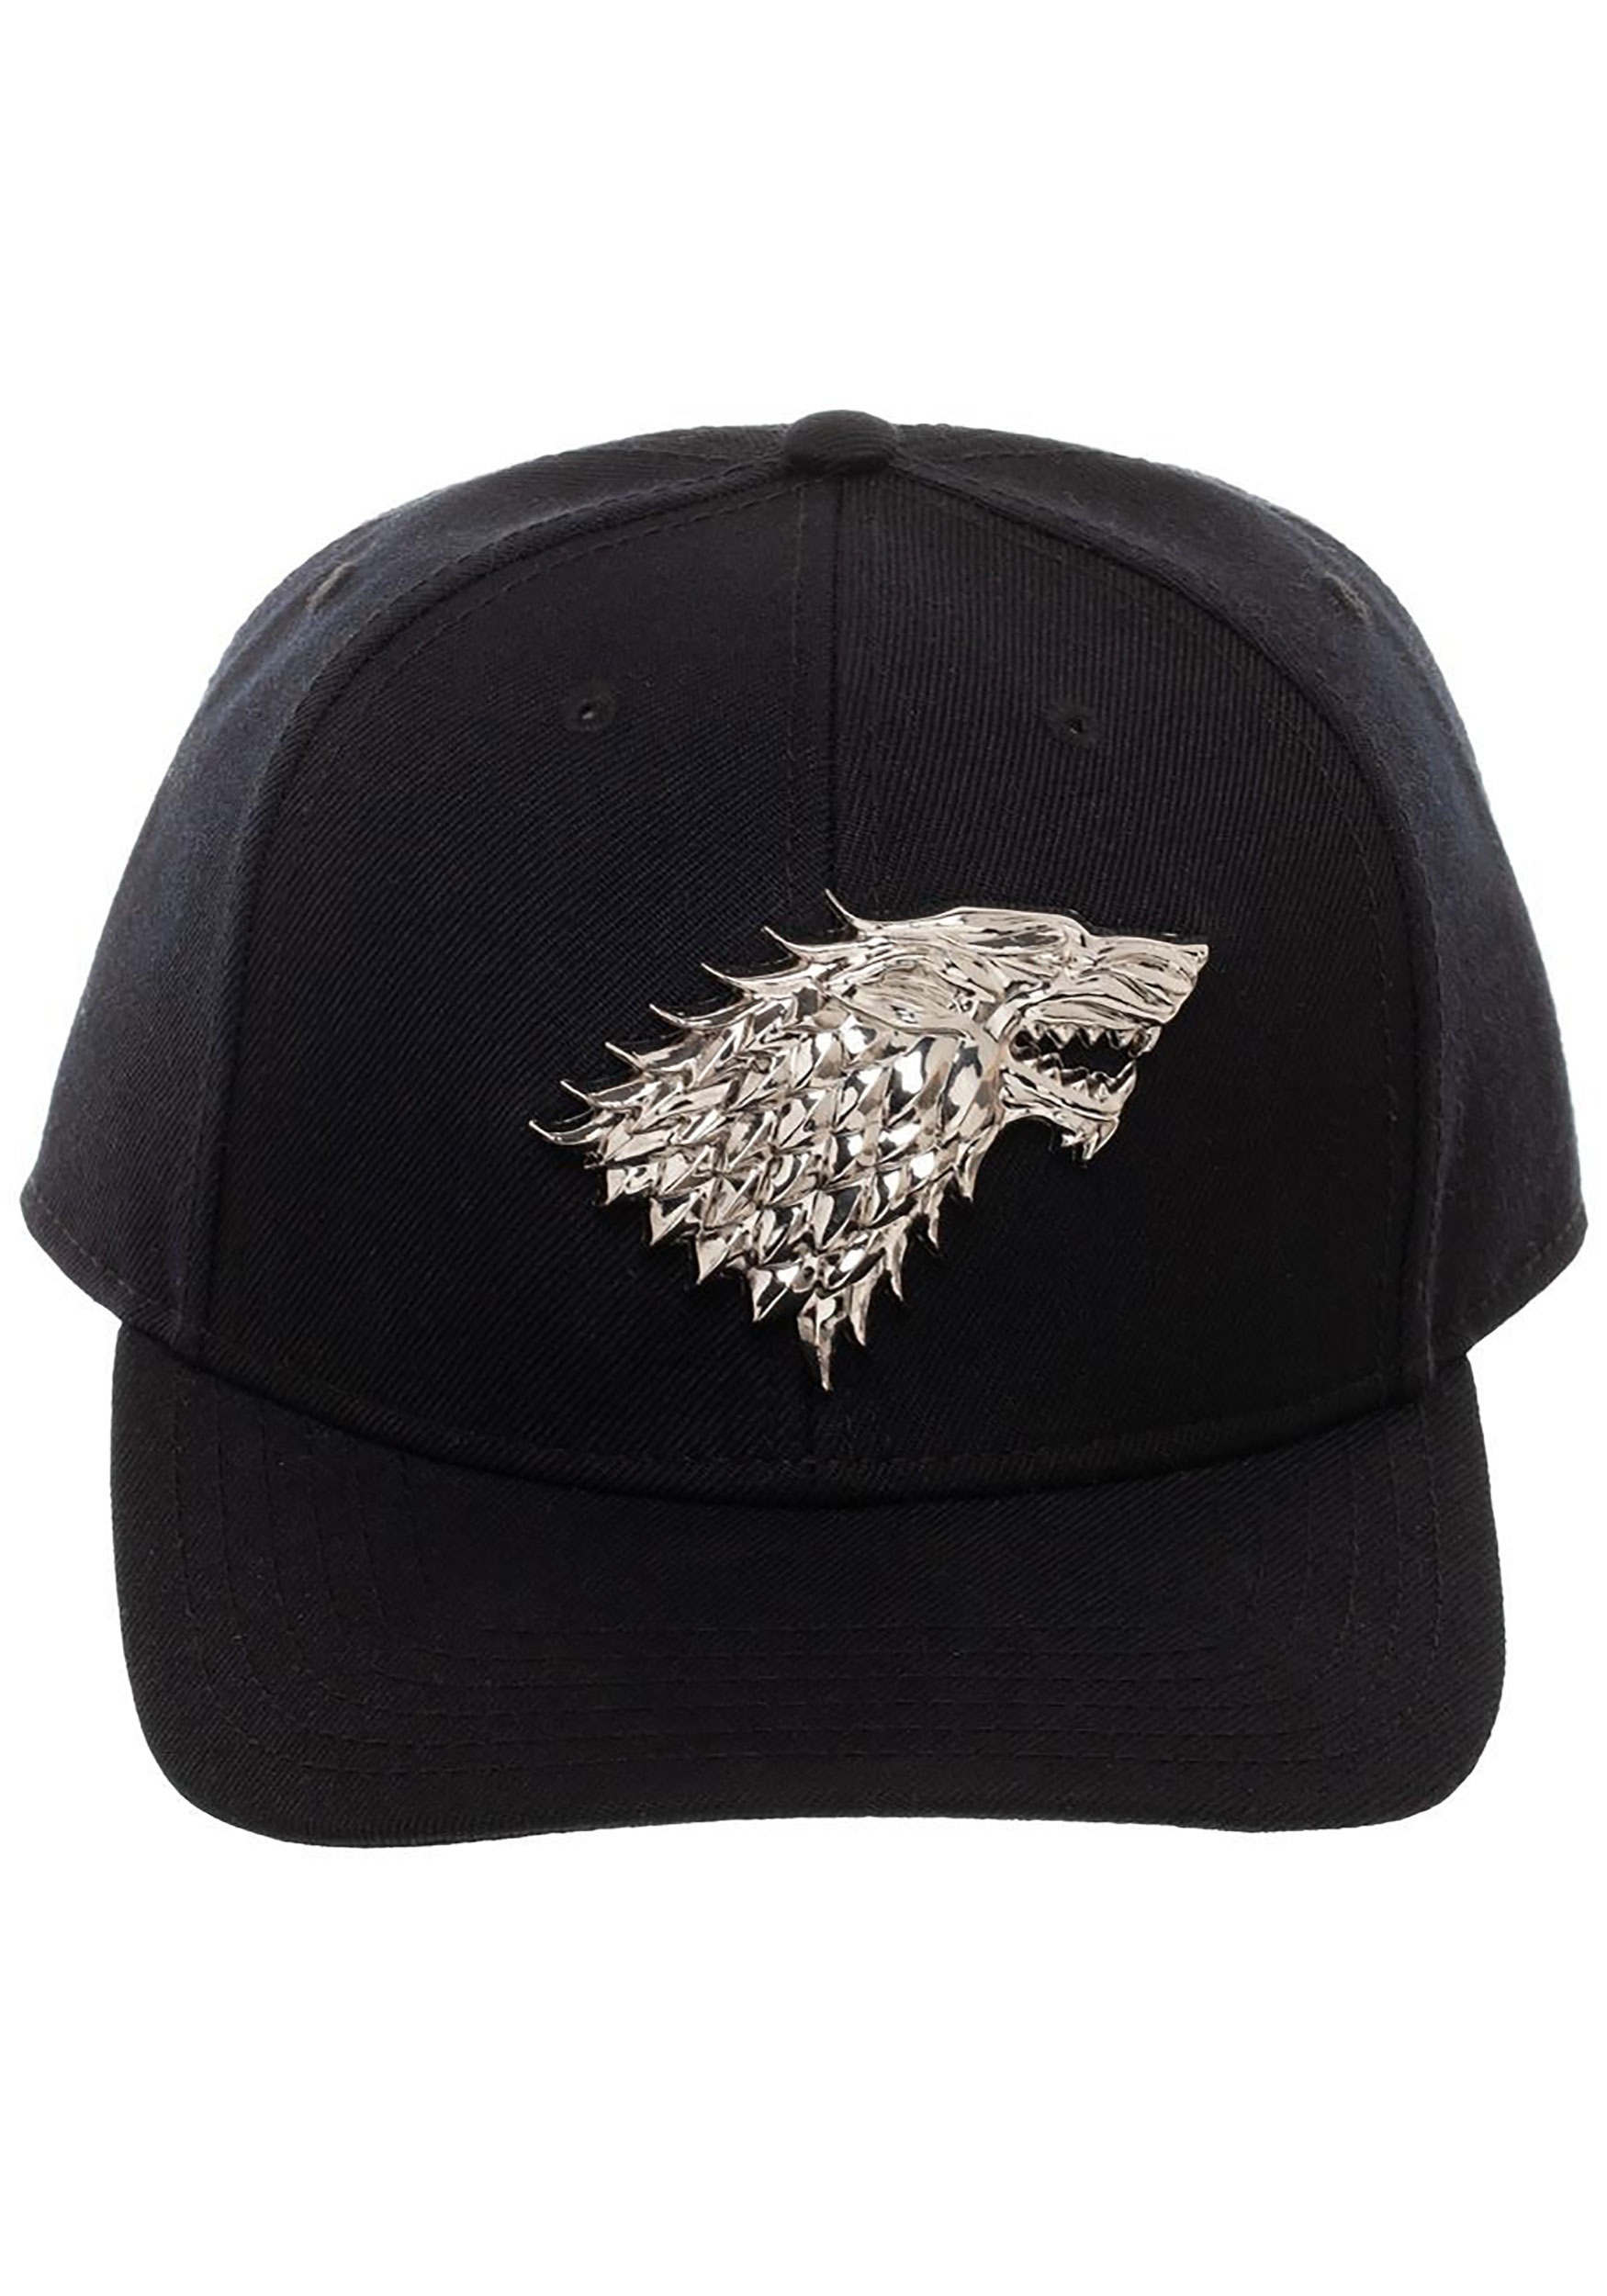 House Stark Game of Thrones Snapback with 3D Metal Sigil